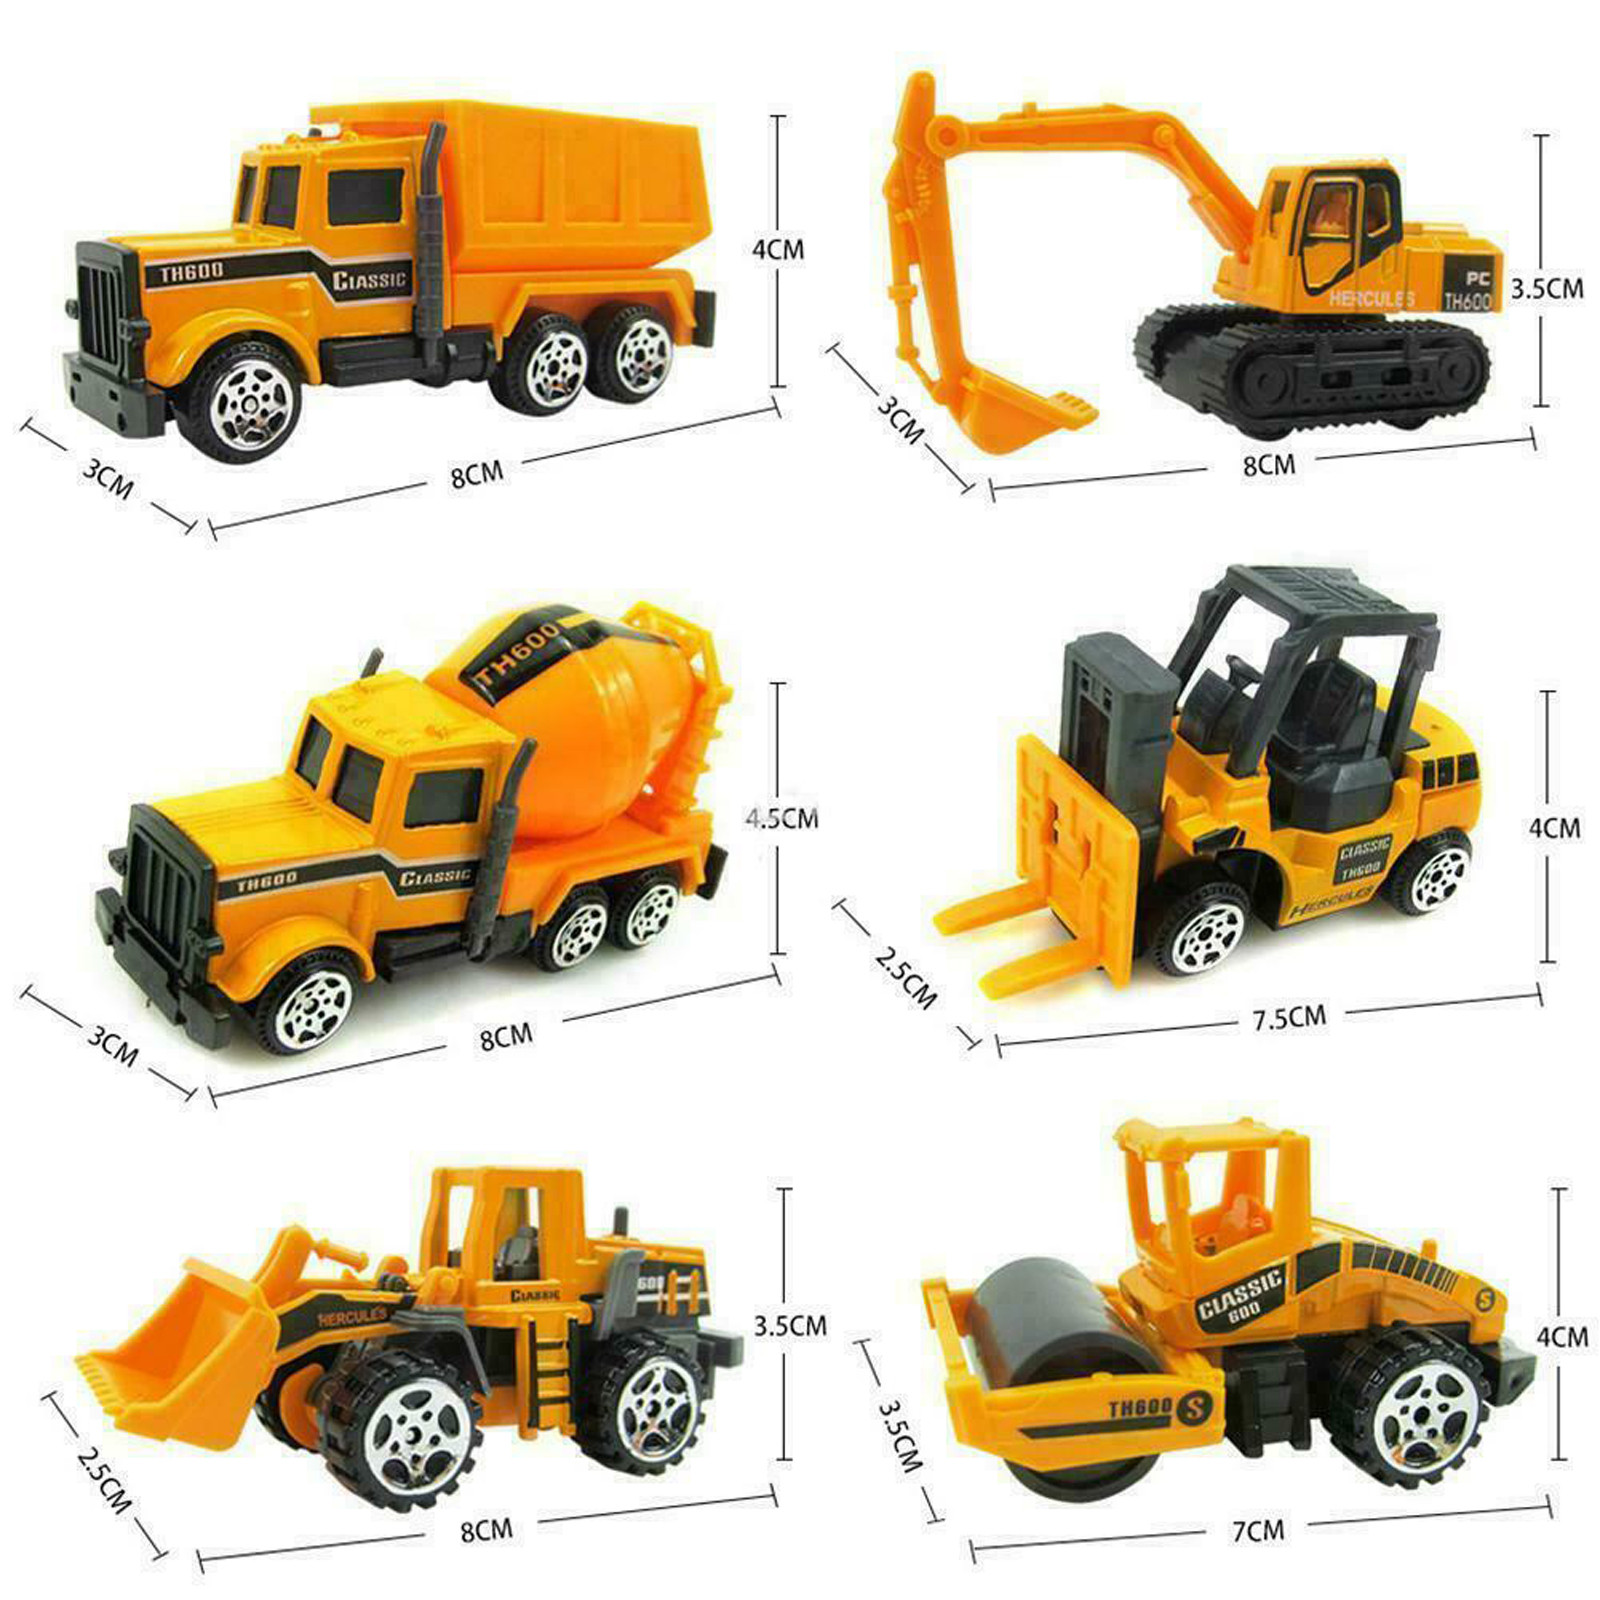 VANLOFE Car Toys For Boys Aged 2 3 4+ Gift 6 PC Diecast Mini Alloy Inertial Engineering Vehicle Dump Truck Educational Toys - image 4 of 8